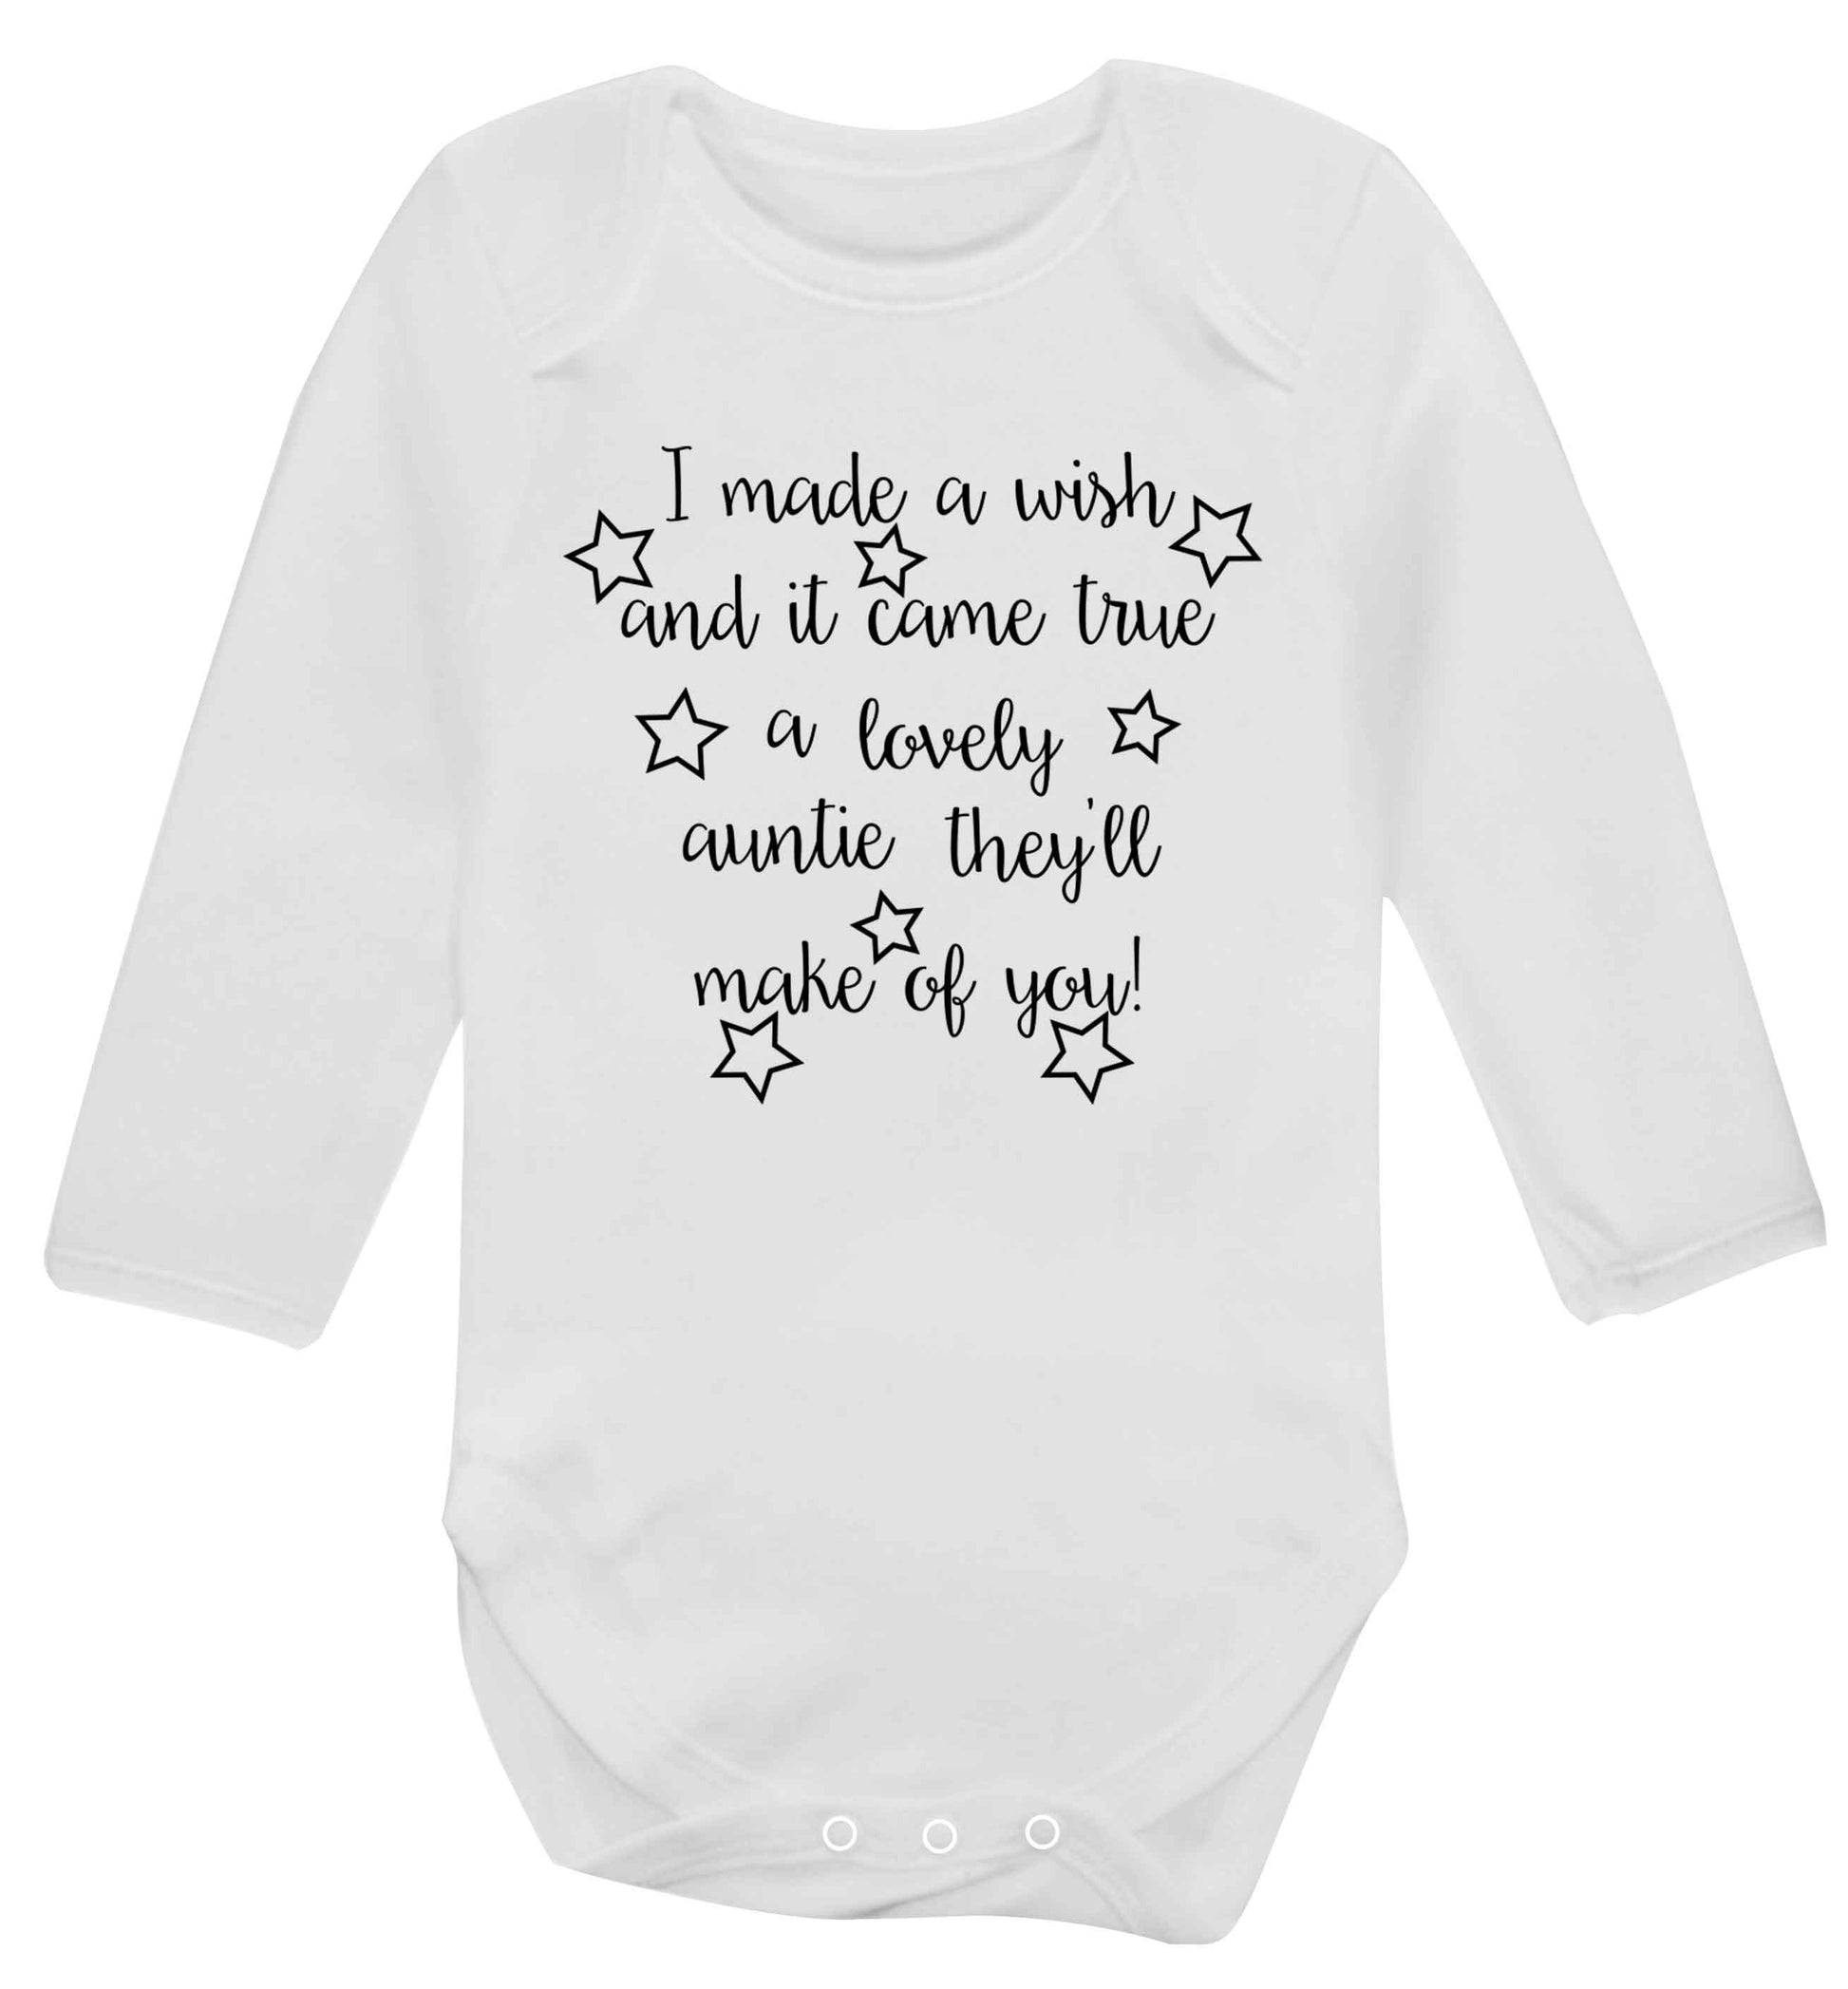 I made a wish and it came true a lovely auntie they'll make of you! Baby Vest long sleeved white 6-12 months